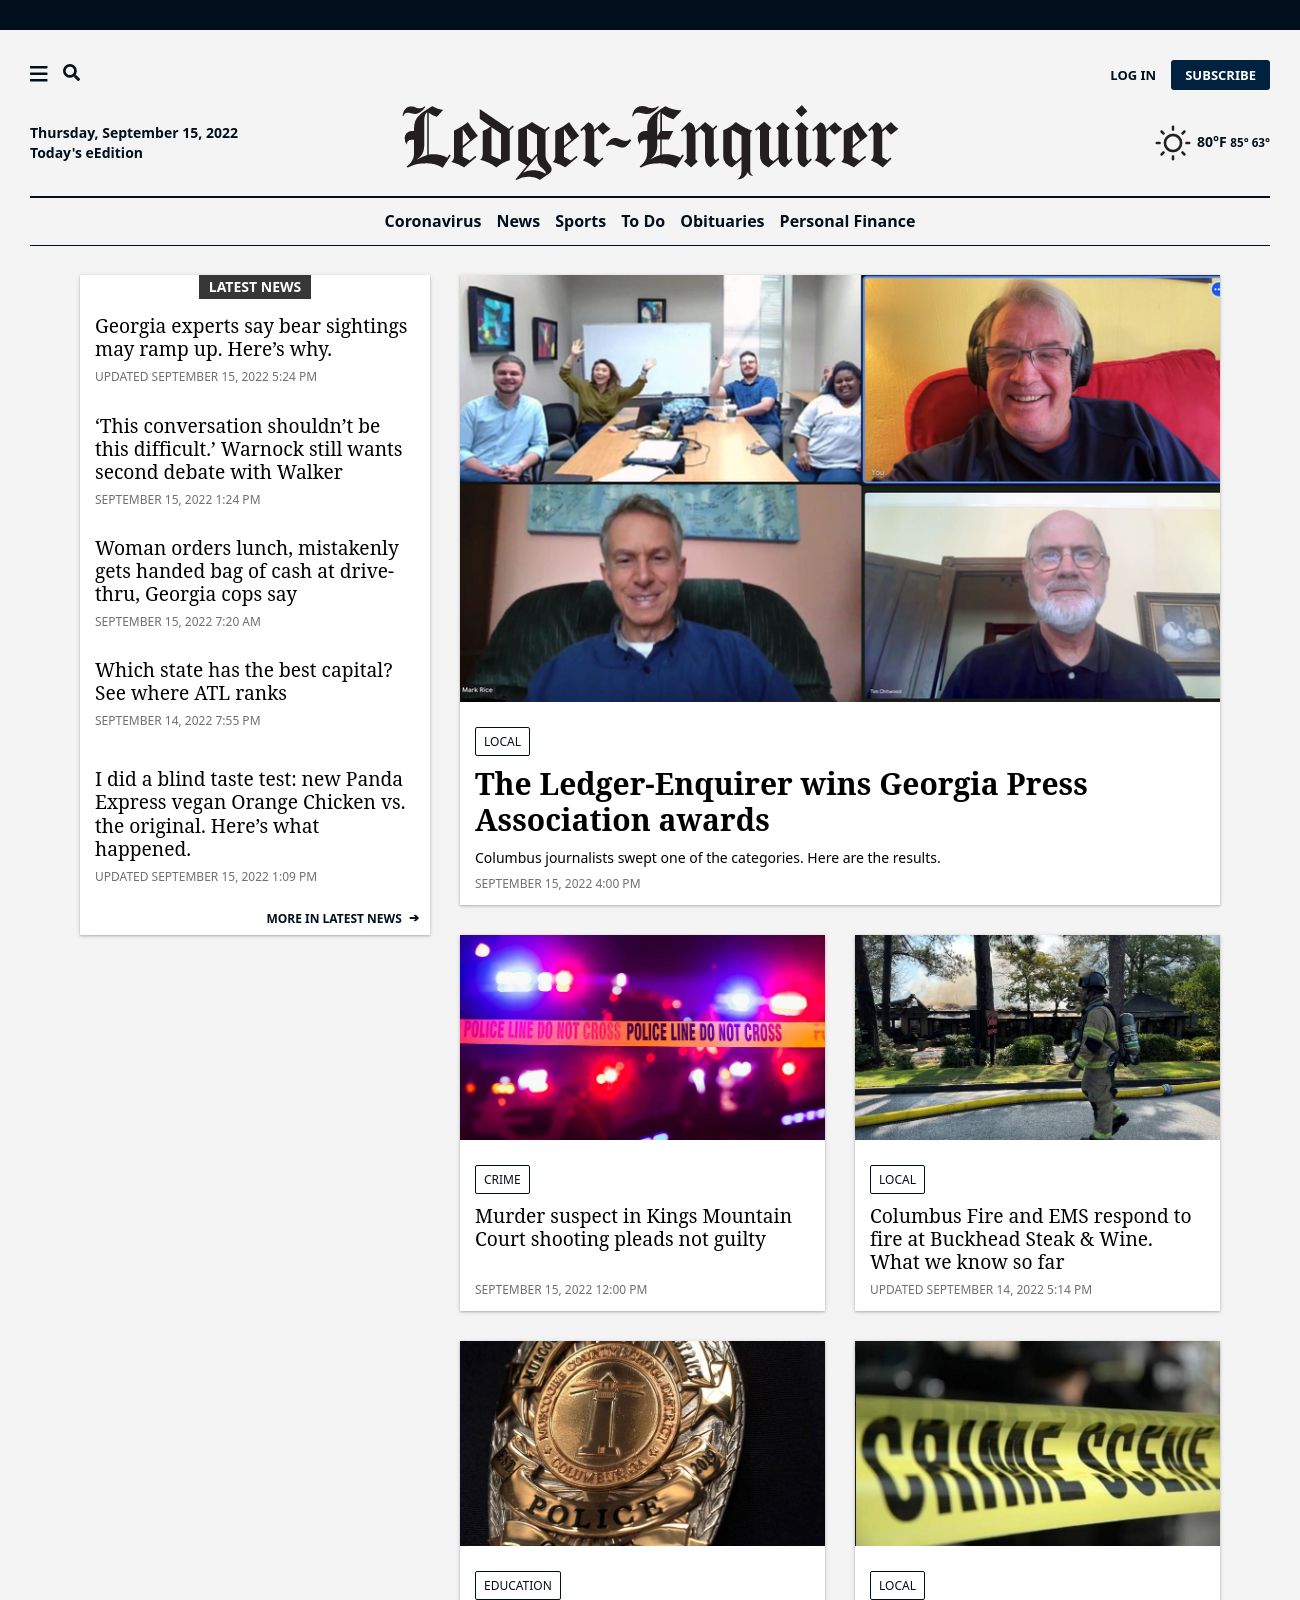 The Ledger-Enquirer at 2022-09-15 19:54:57-04:00 local time